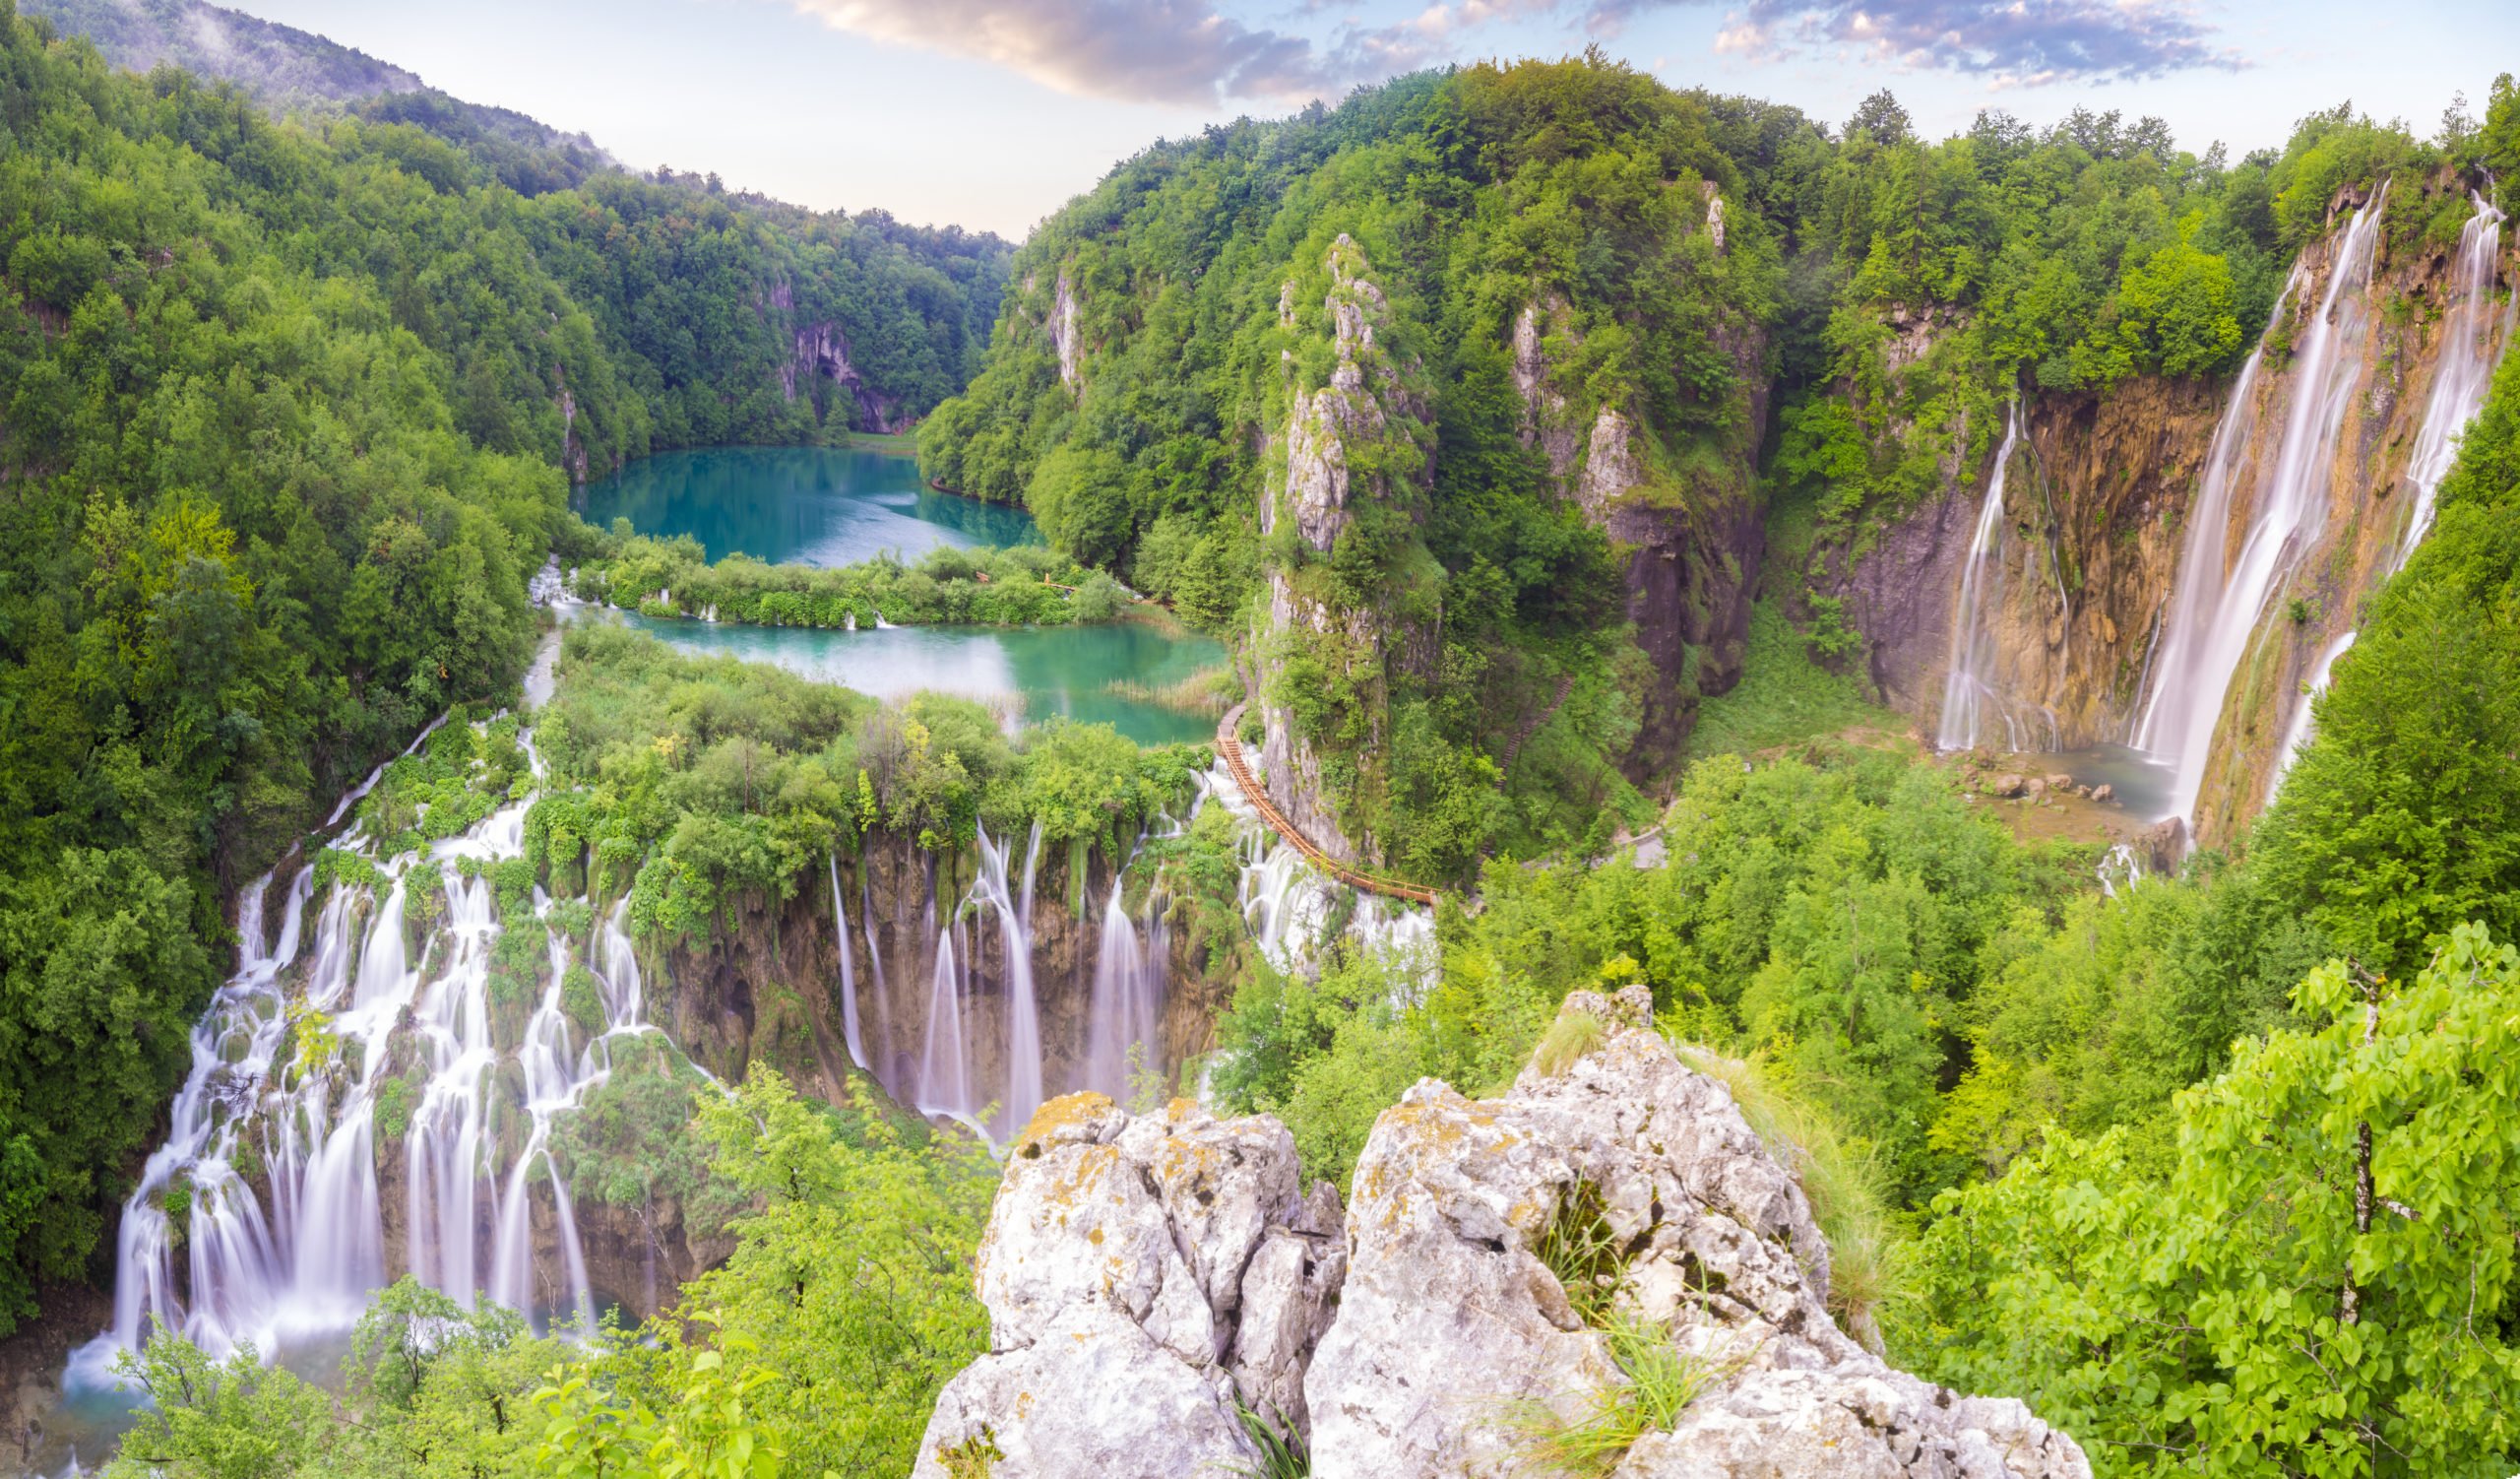 Discover The Stunning Plitvice Lakes National Park On The 7 Day Highlights Of Croatia Package Tour